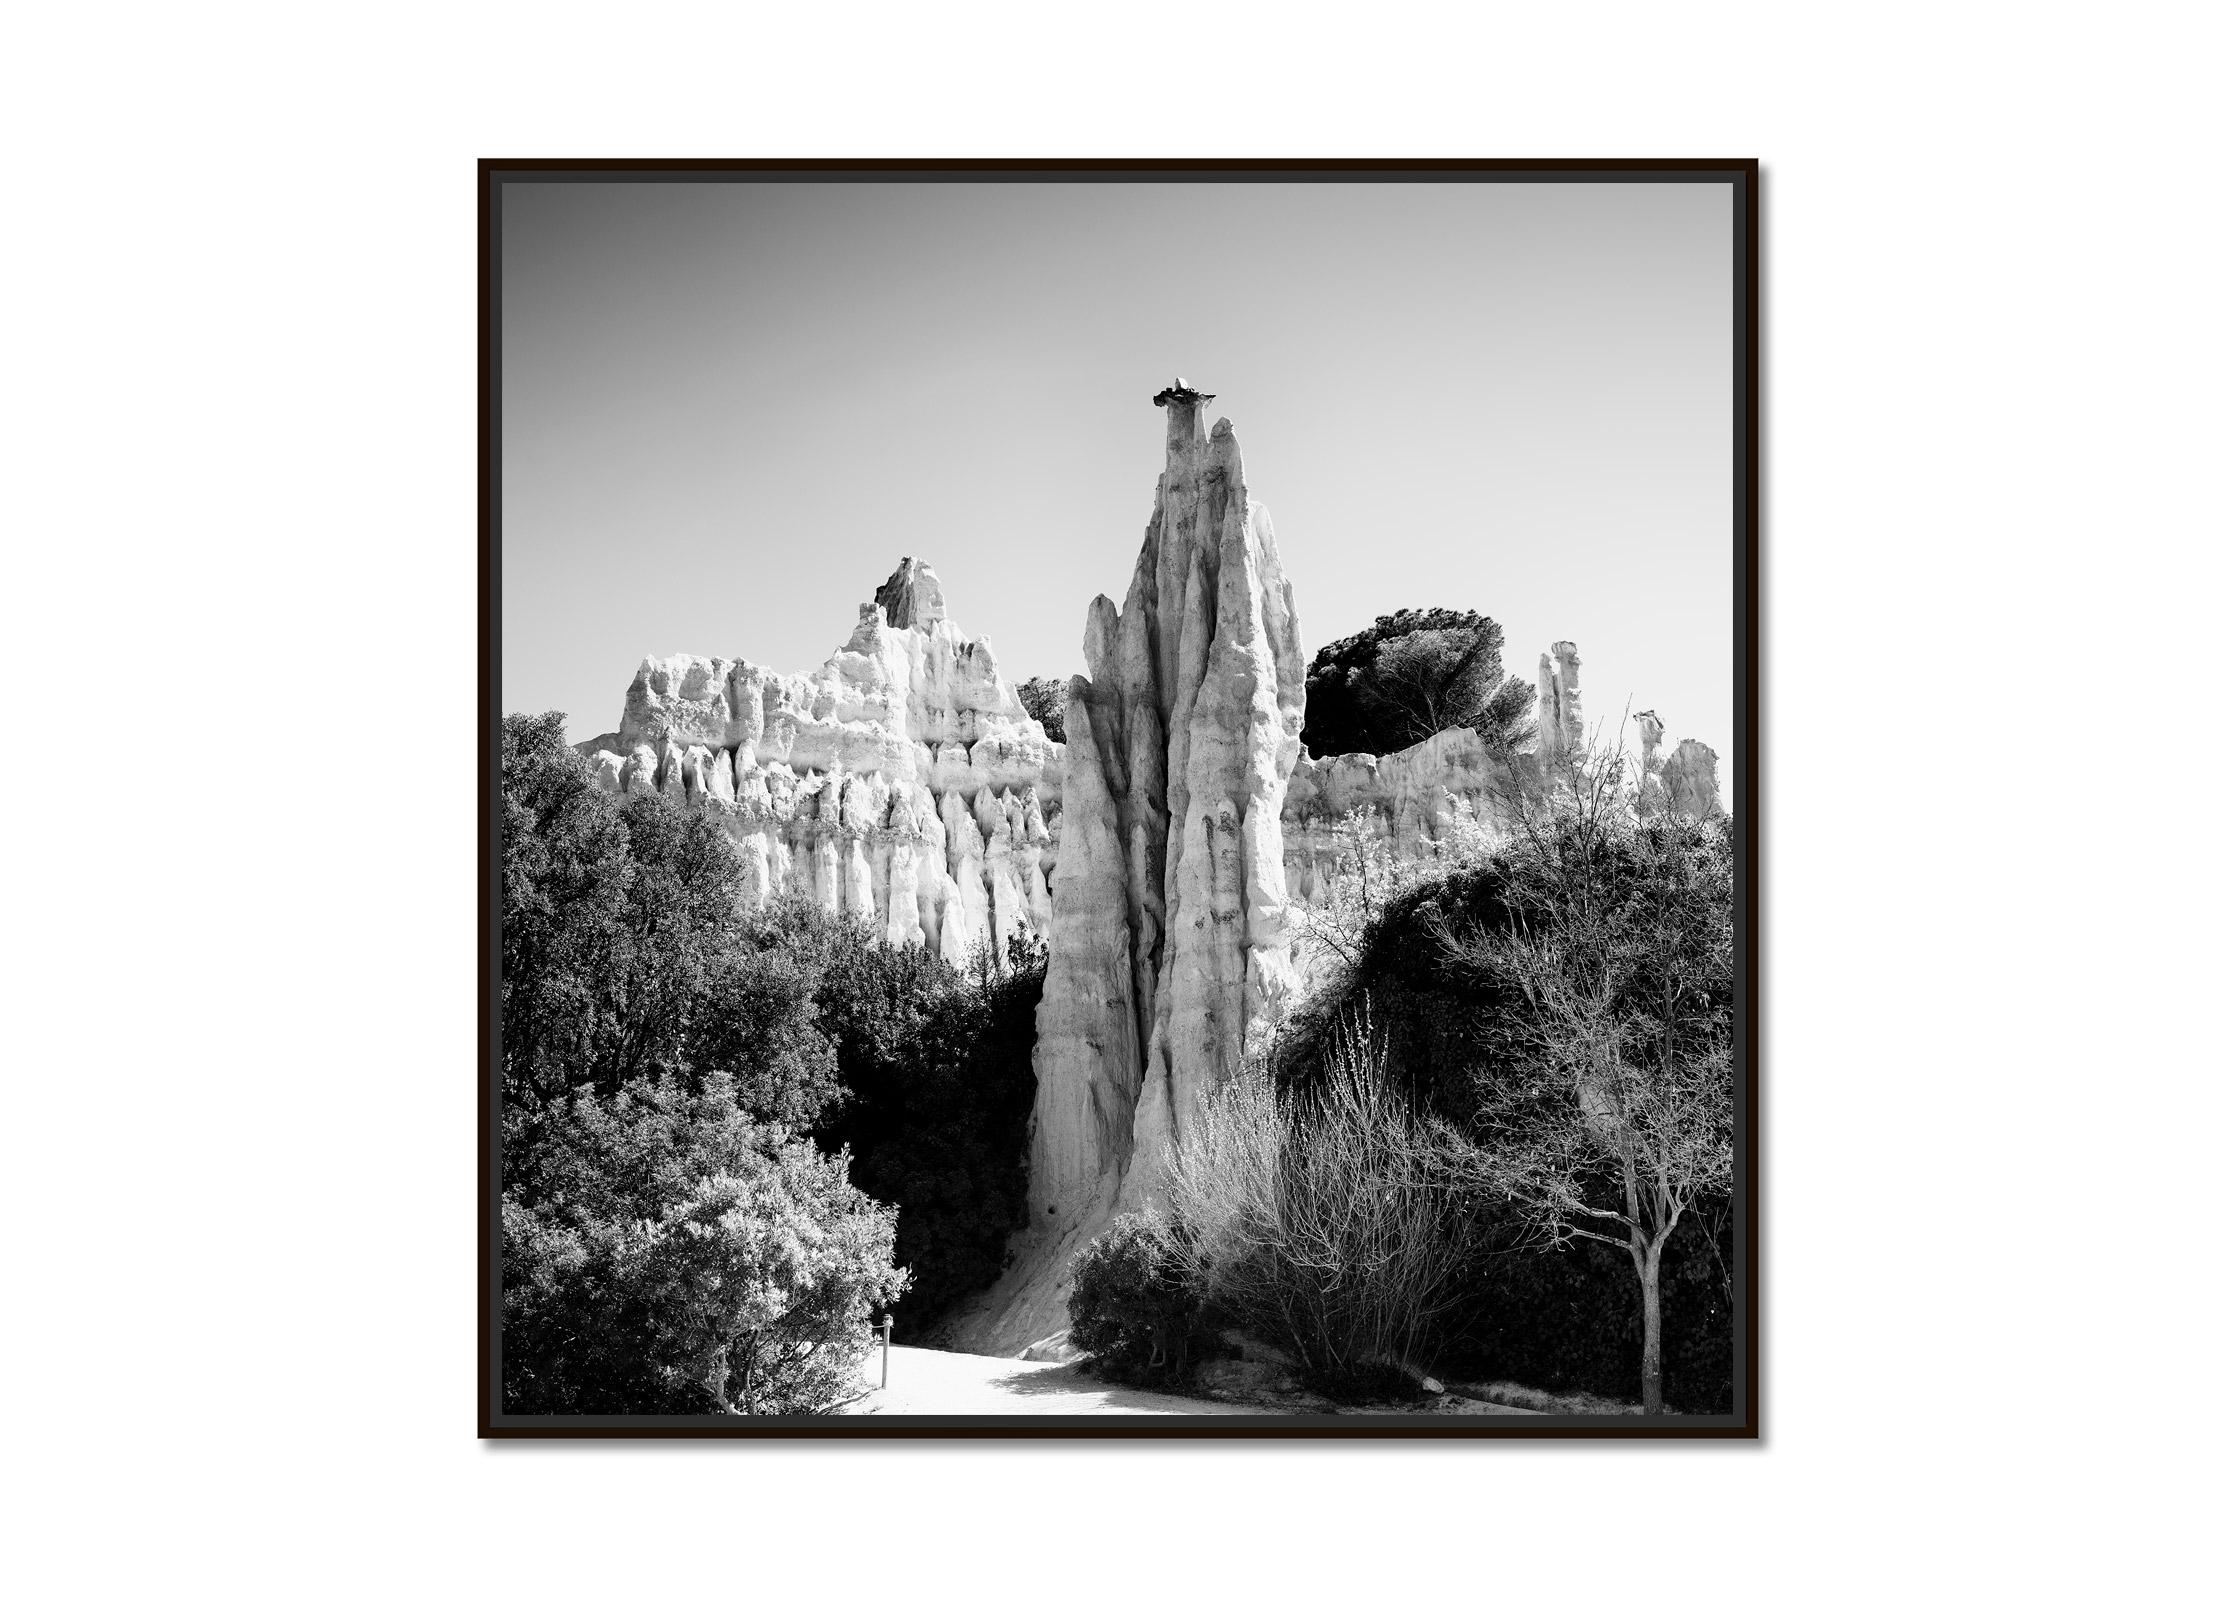 The Organs of Ille-sur-Tet, sandstone formation, black and white art landscape - Photograph by Gerald Berghammer